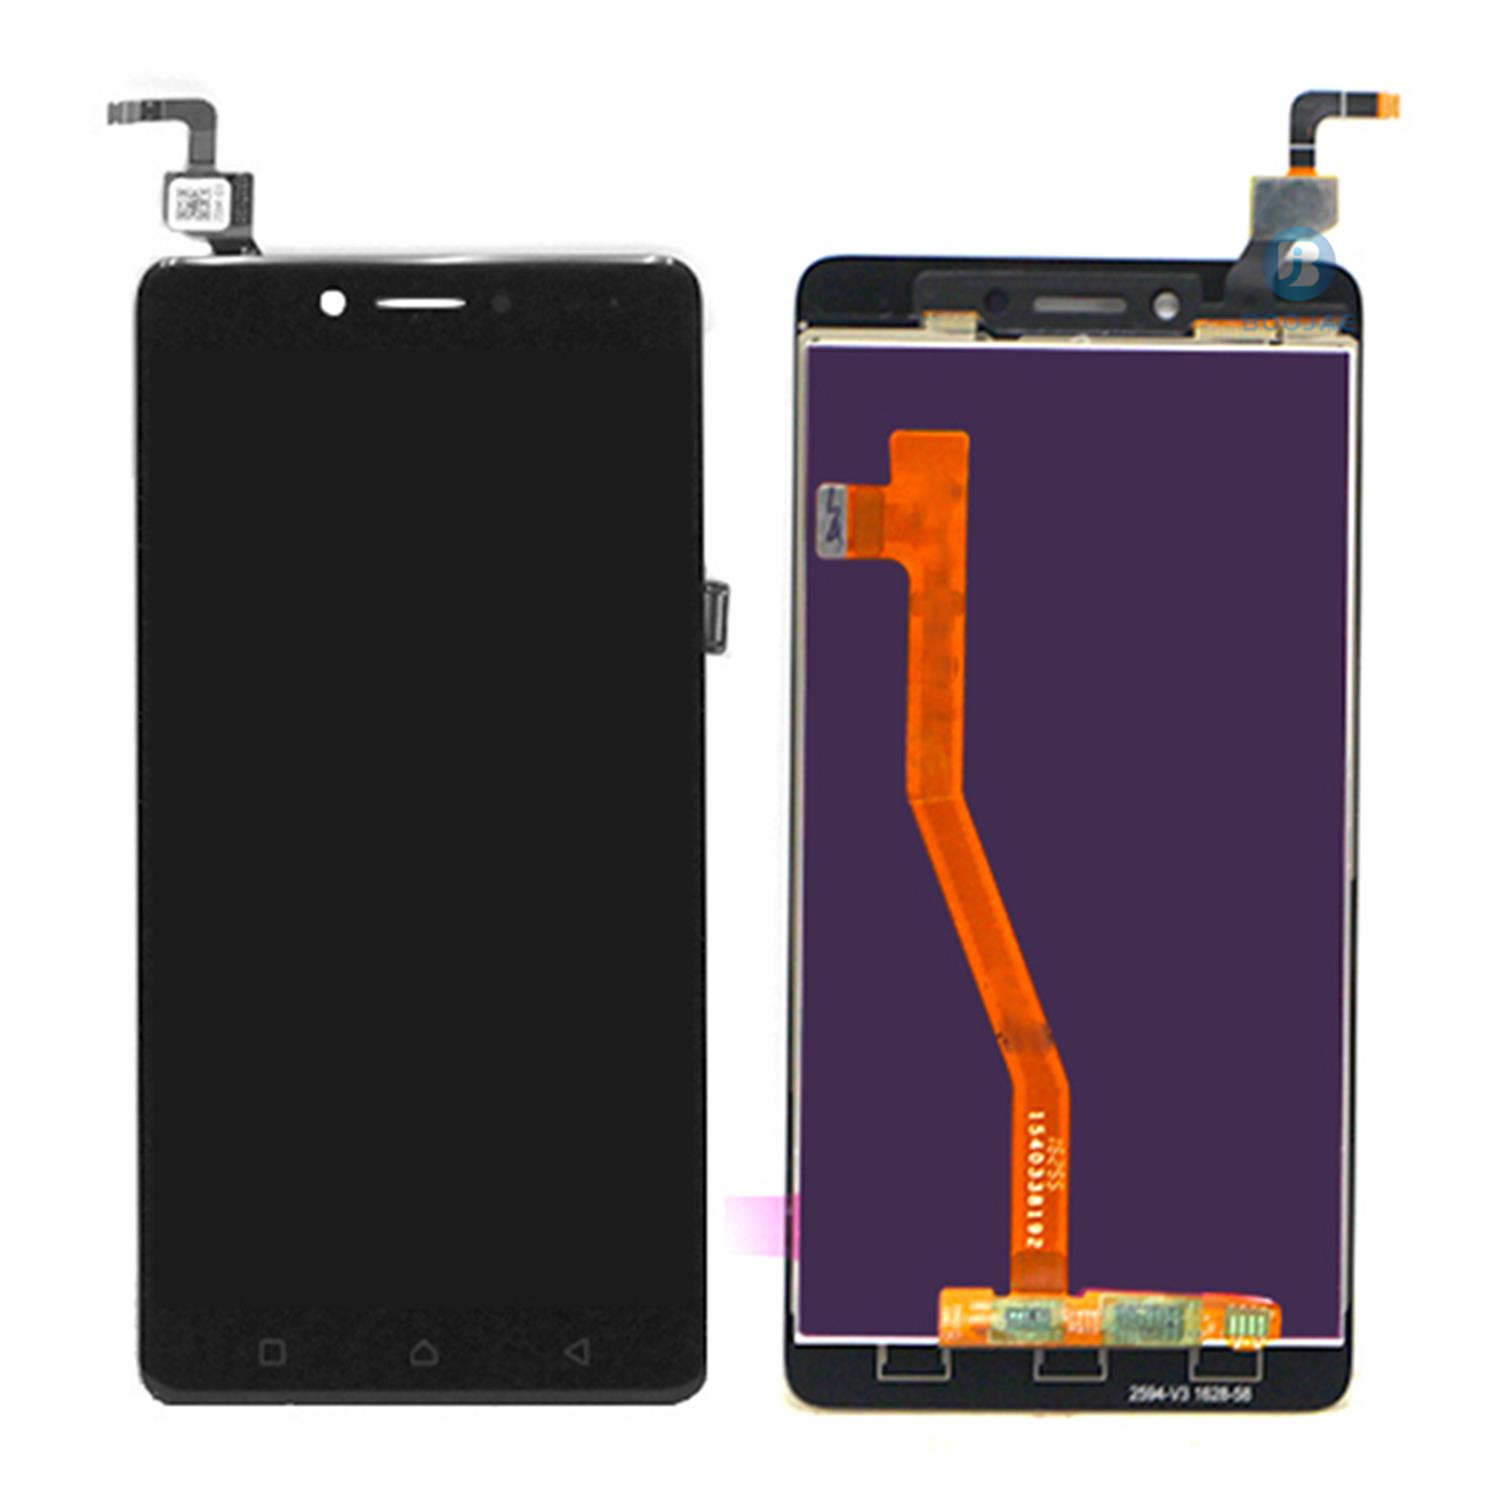 For Lenovo K6 LCD Screen Display and Touch Panel Digitizer Assembly Replacement